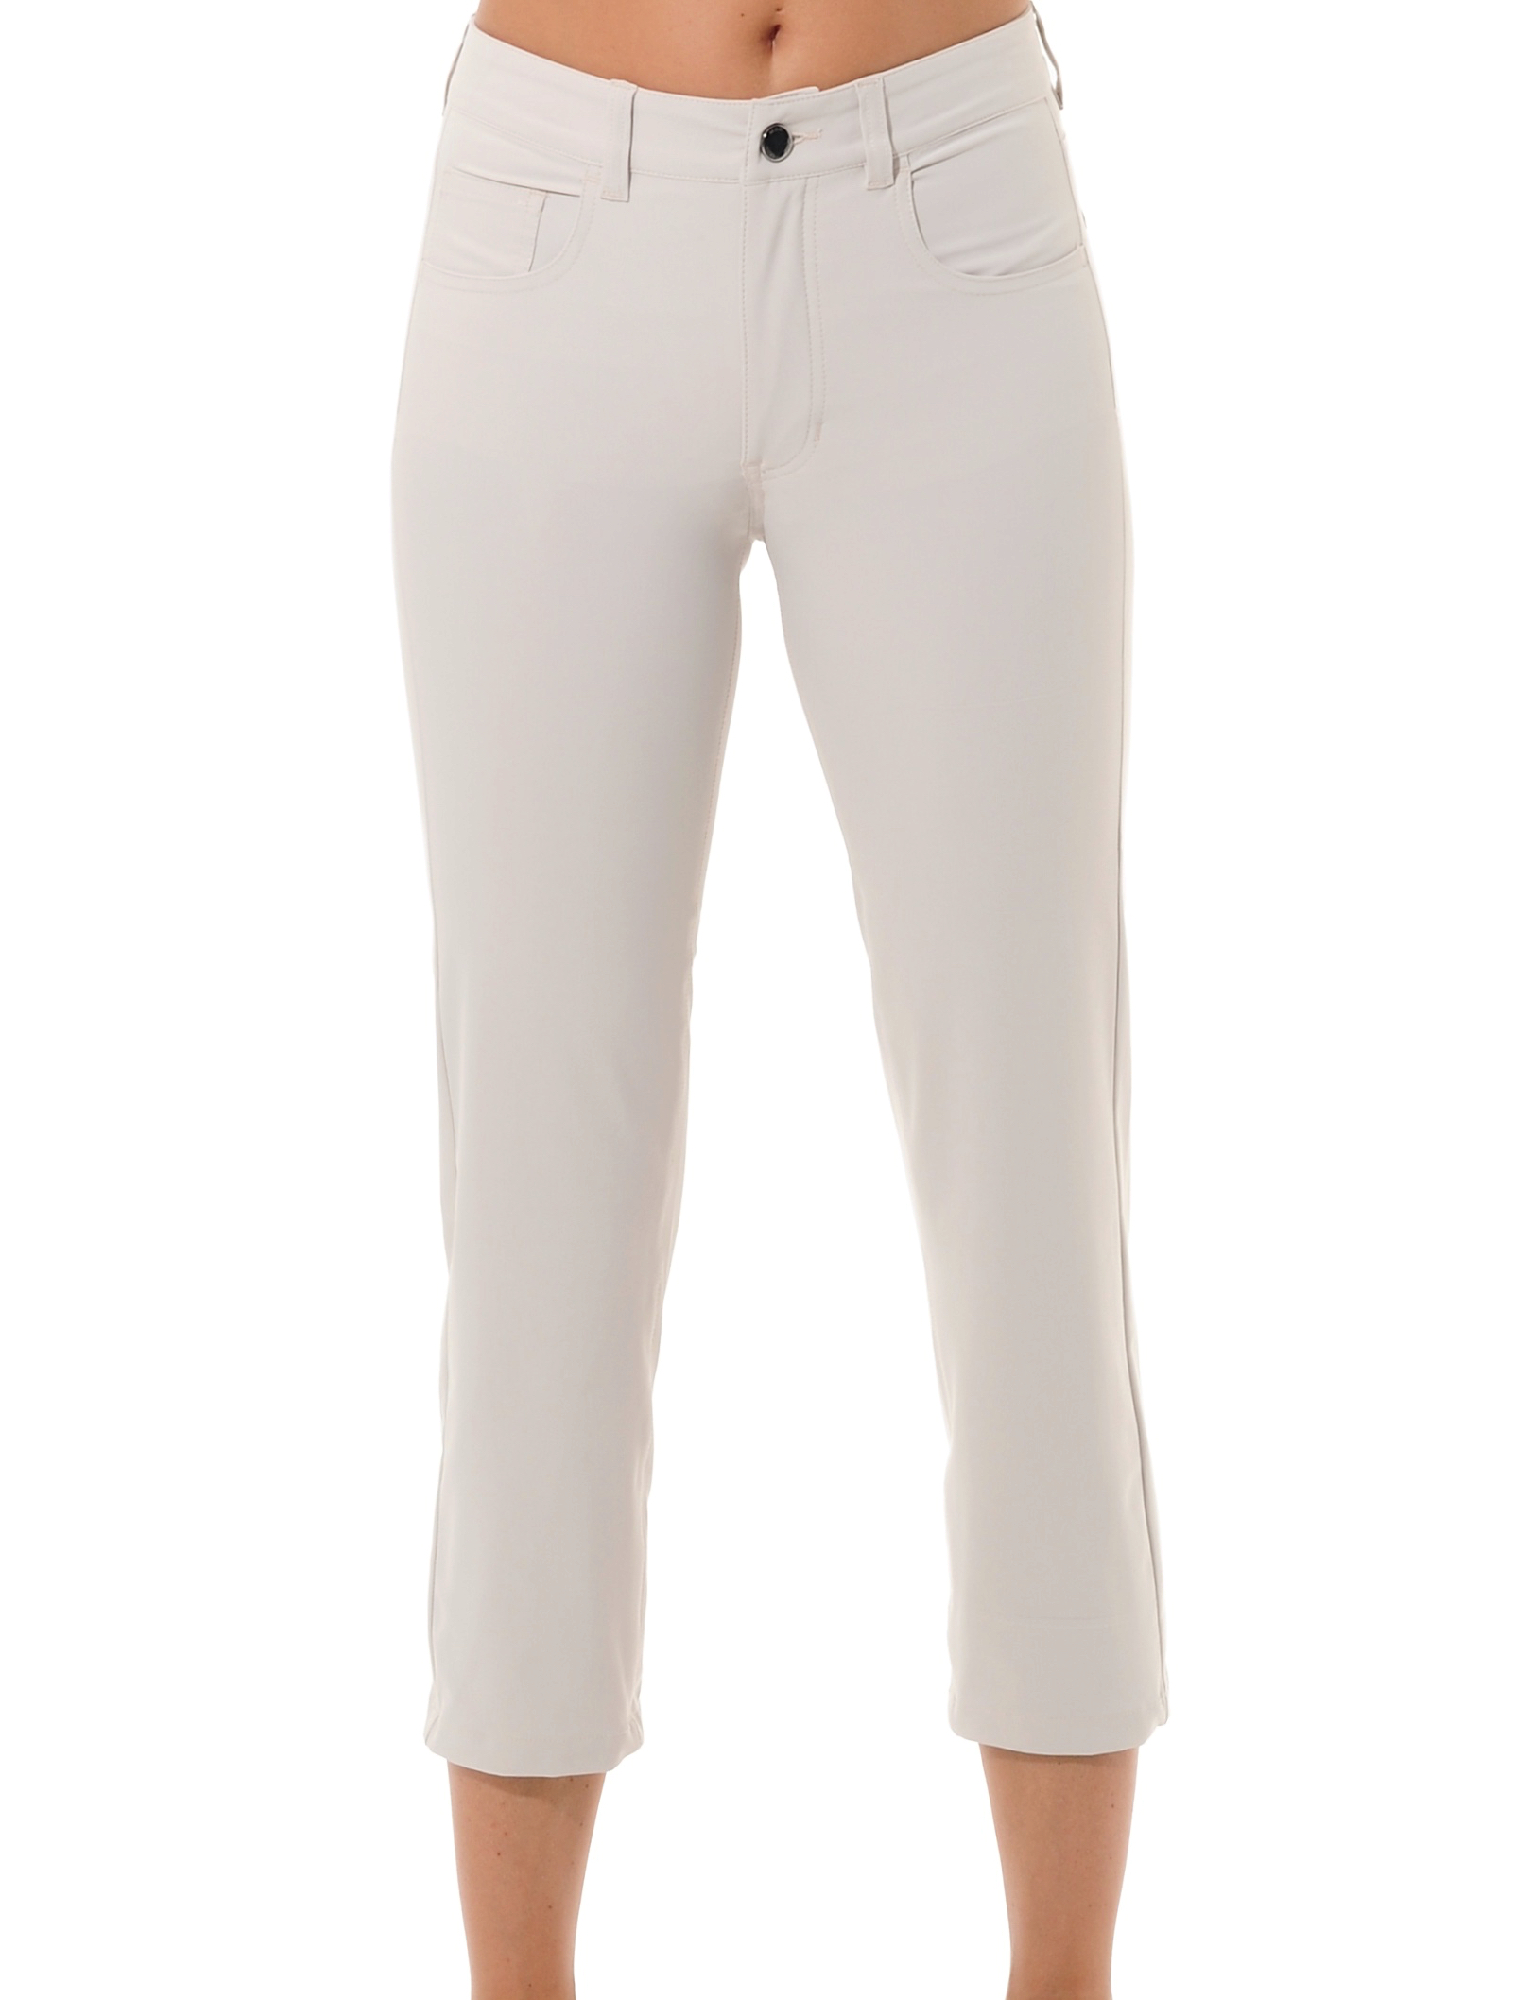 4way stretch cropped straight cut pants linen 